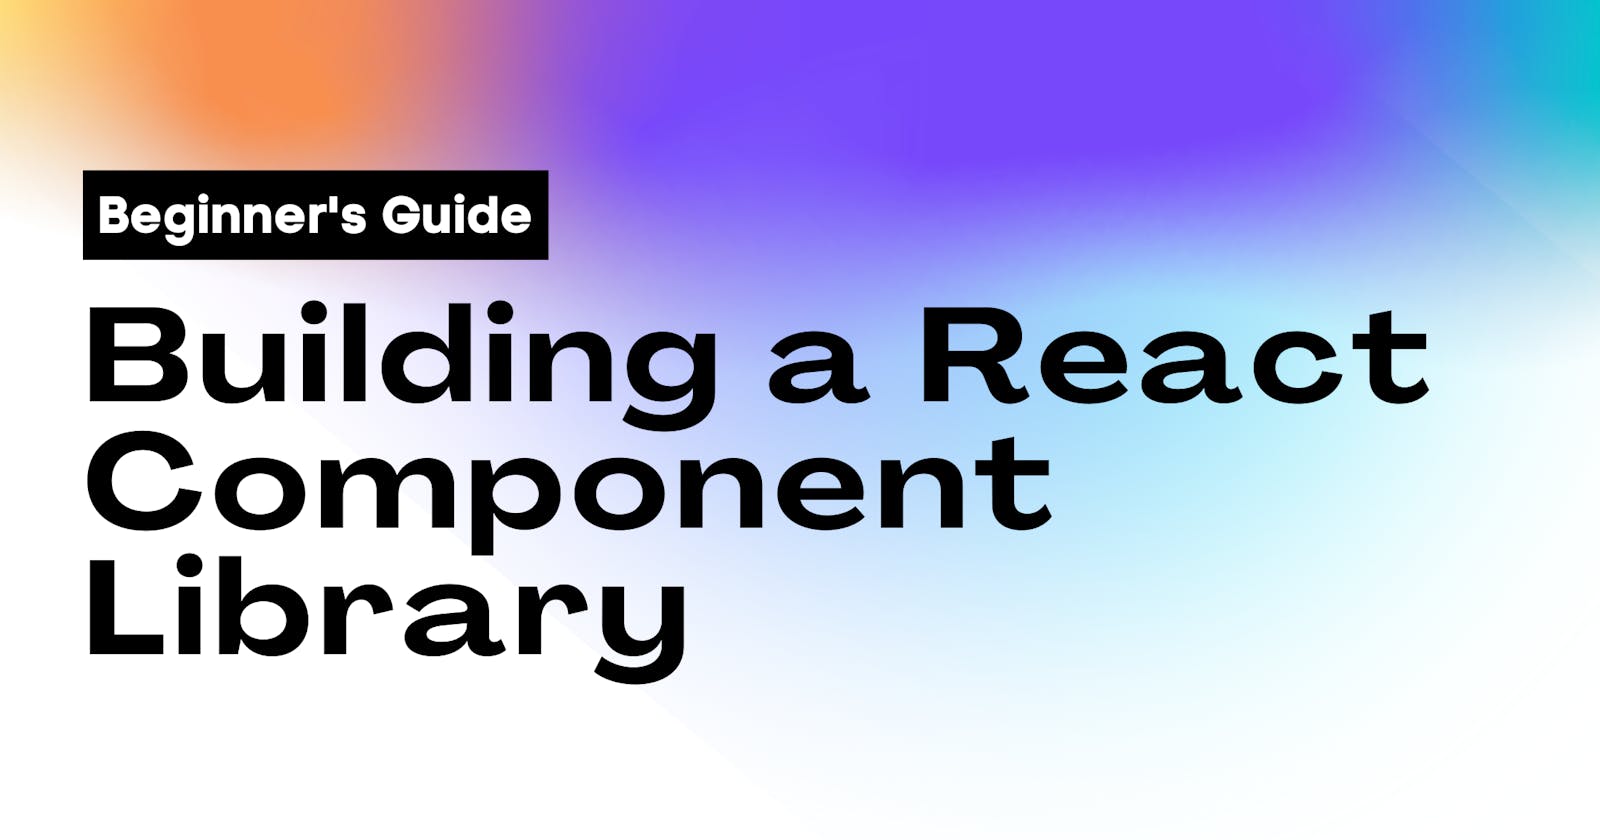 Beginner's Guide to Building a React Component Library